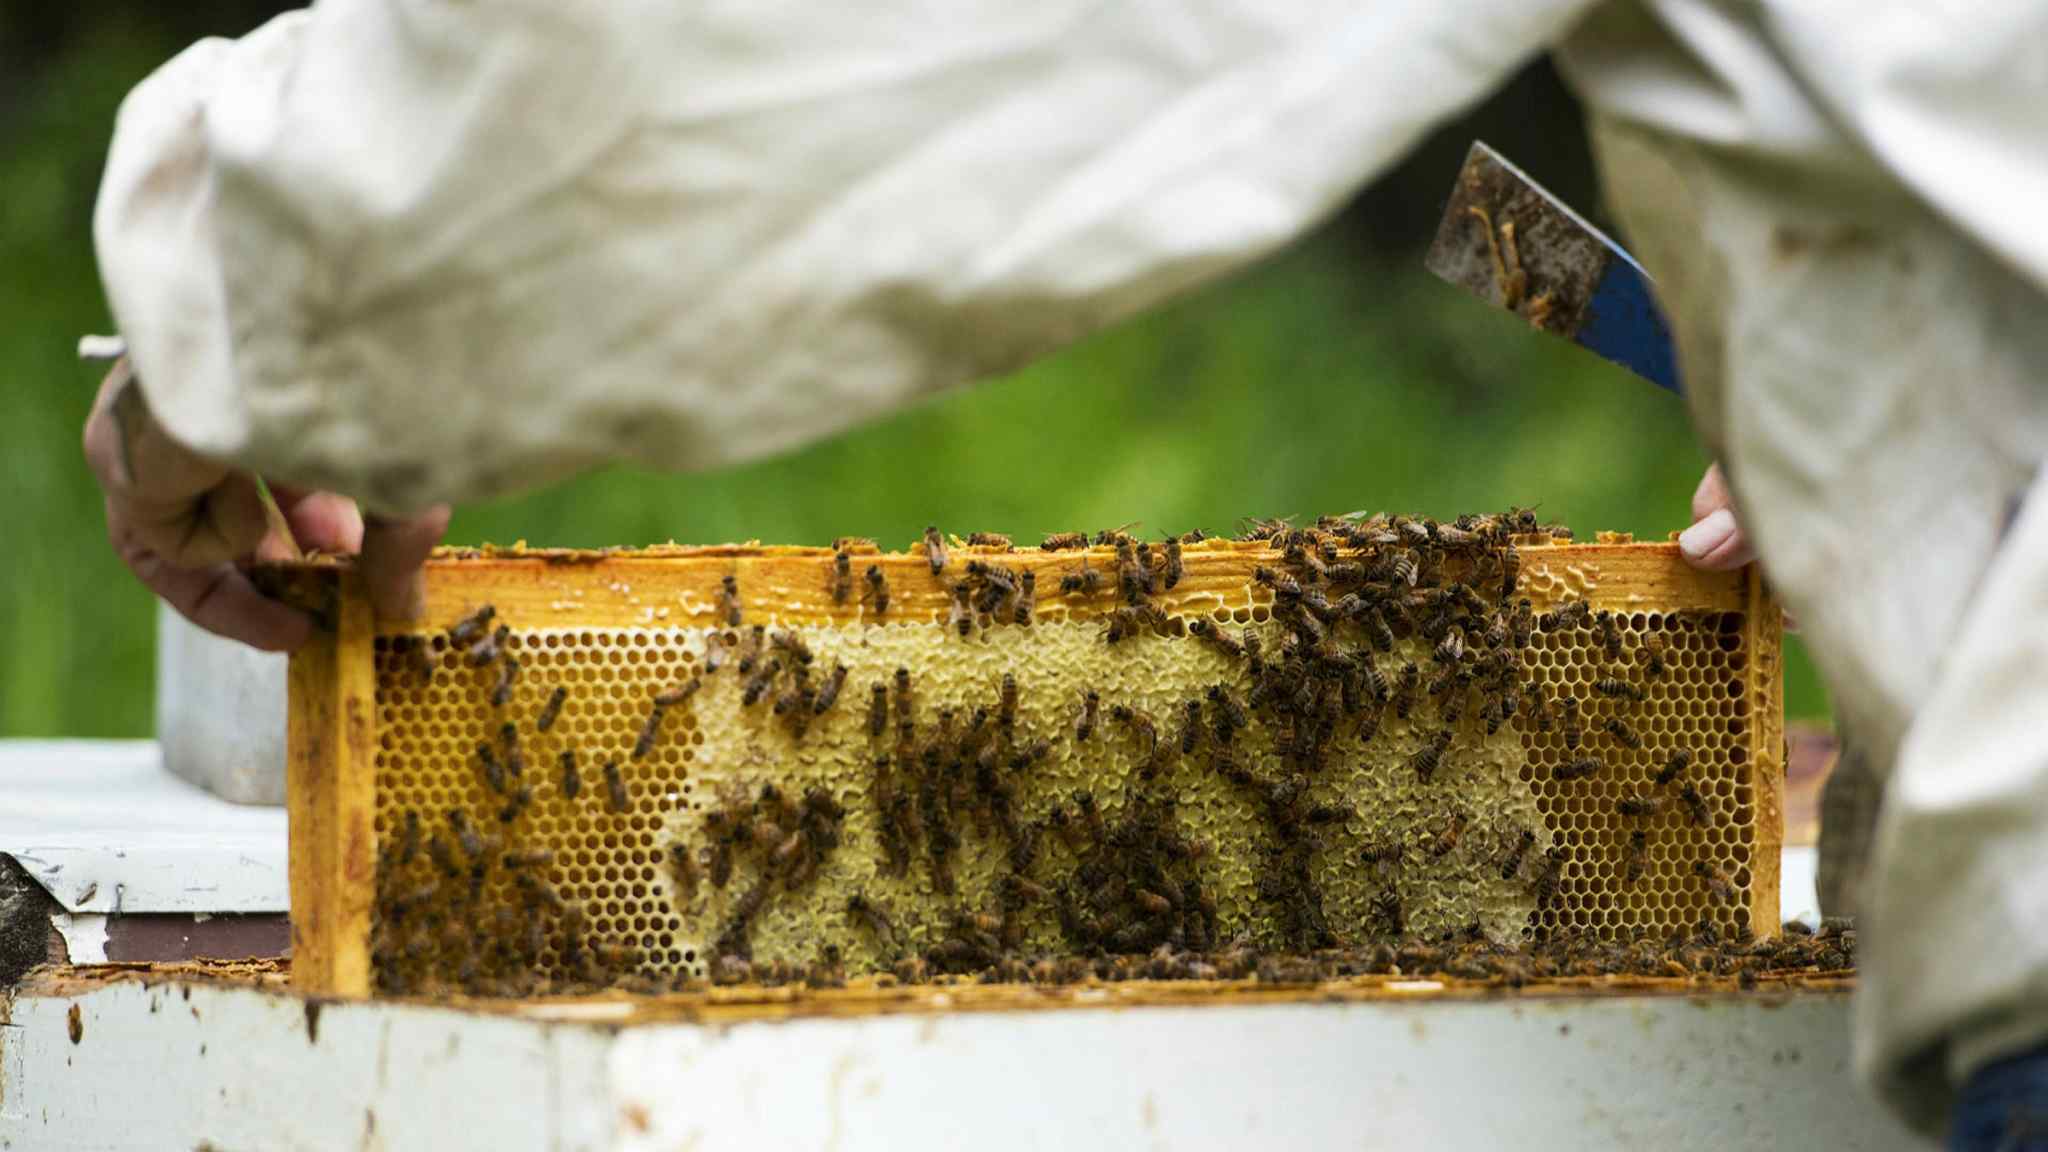 Australia locks down honey bees to protect critical industry from parasite